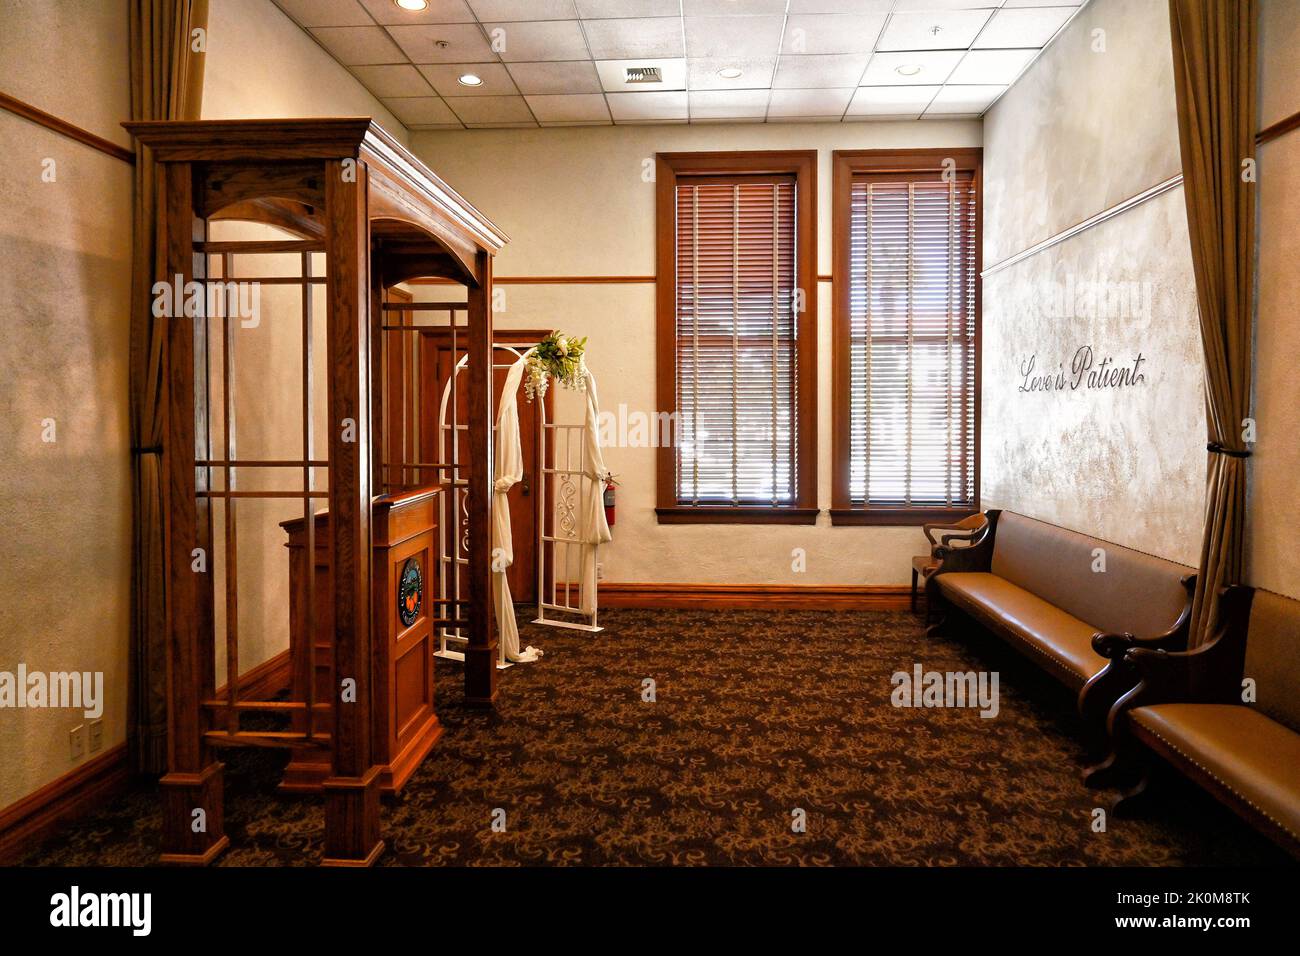 SANTA ANA, CALIFORNIA - 22 AUG 2022: One of the rooms where weddings are performed at the Old Orange County Courthouse, with Love is Patient written o Stock Photo